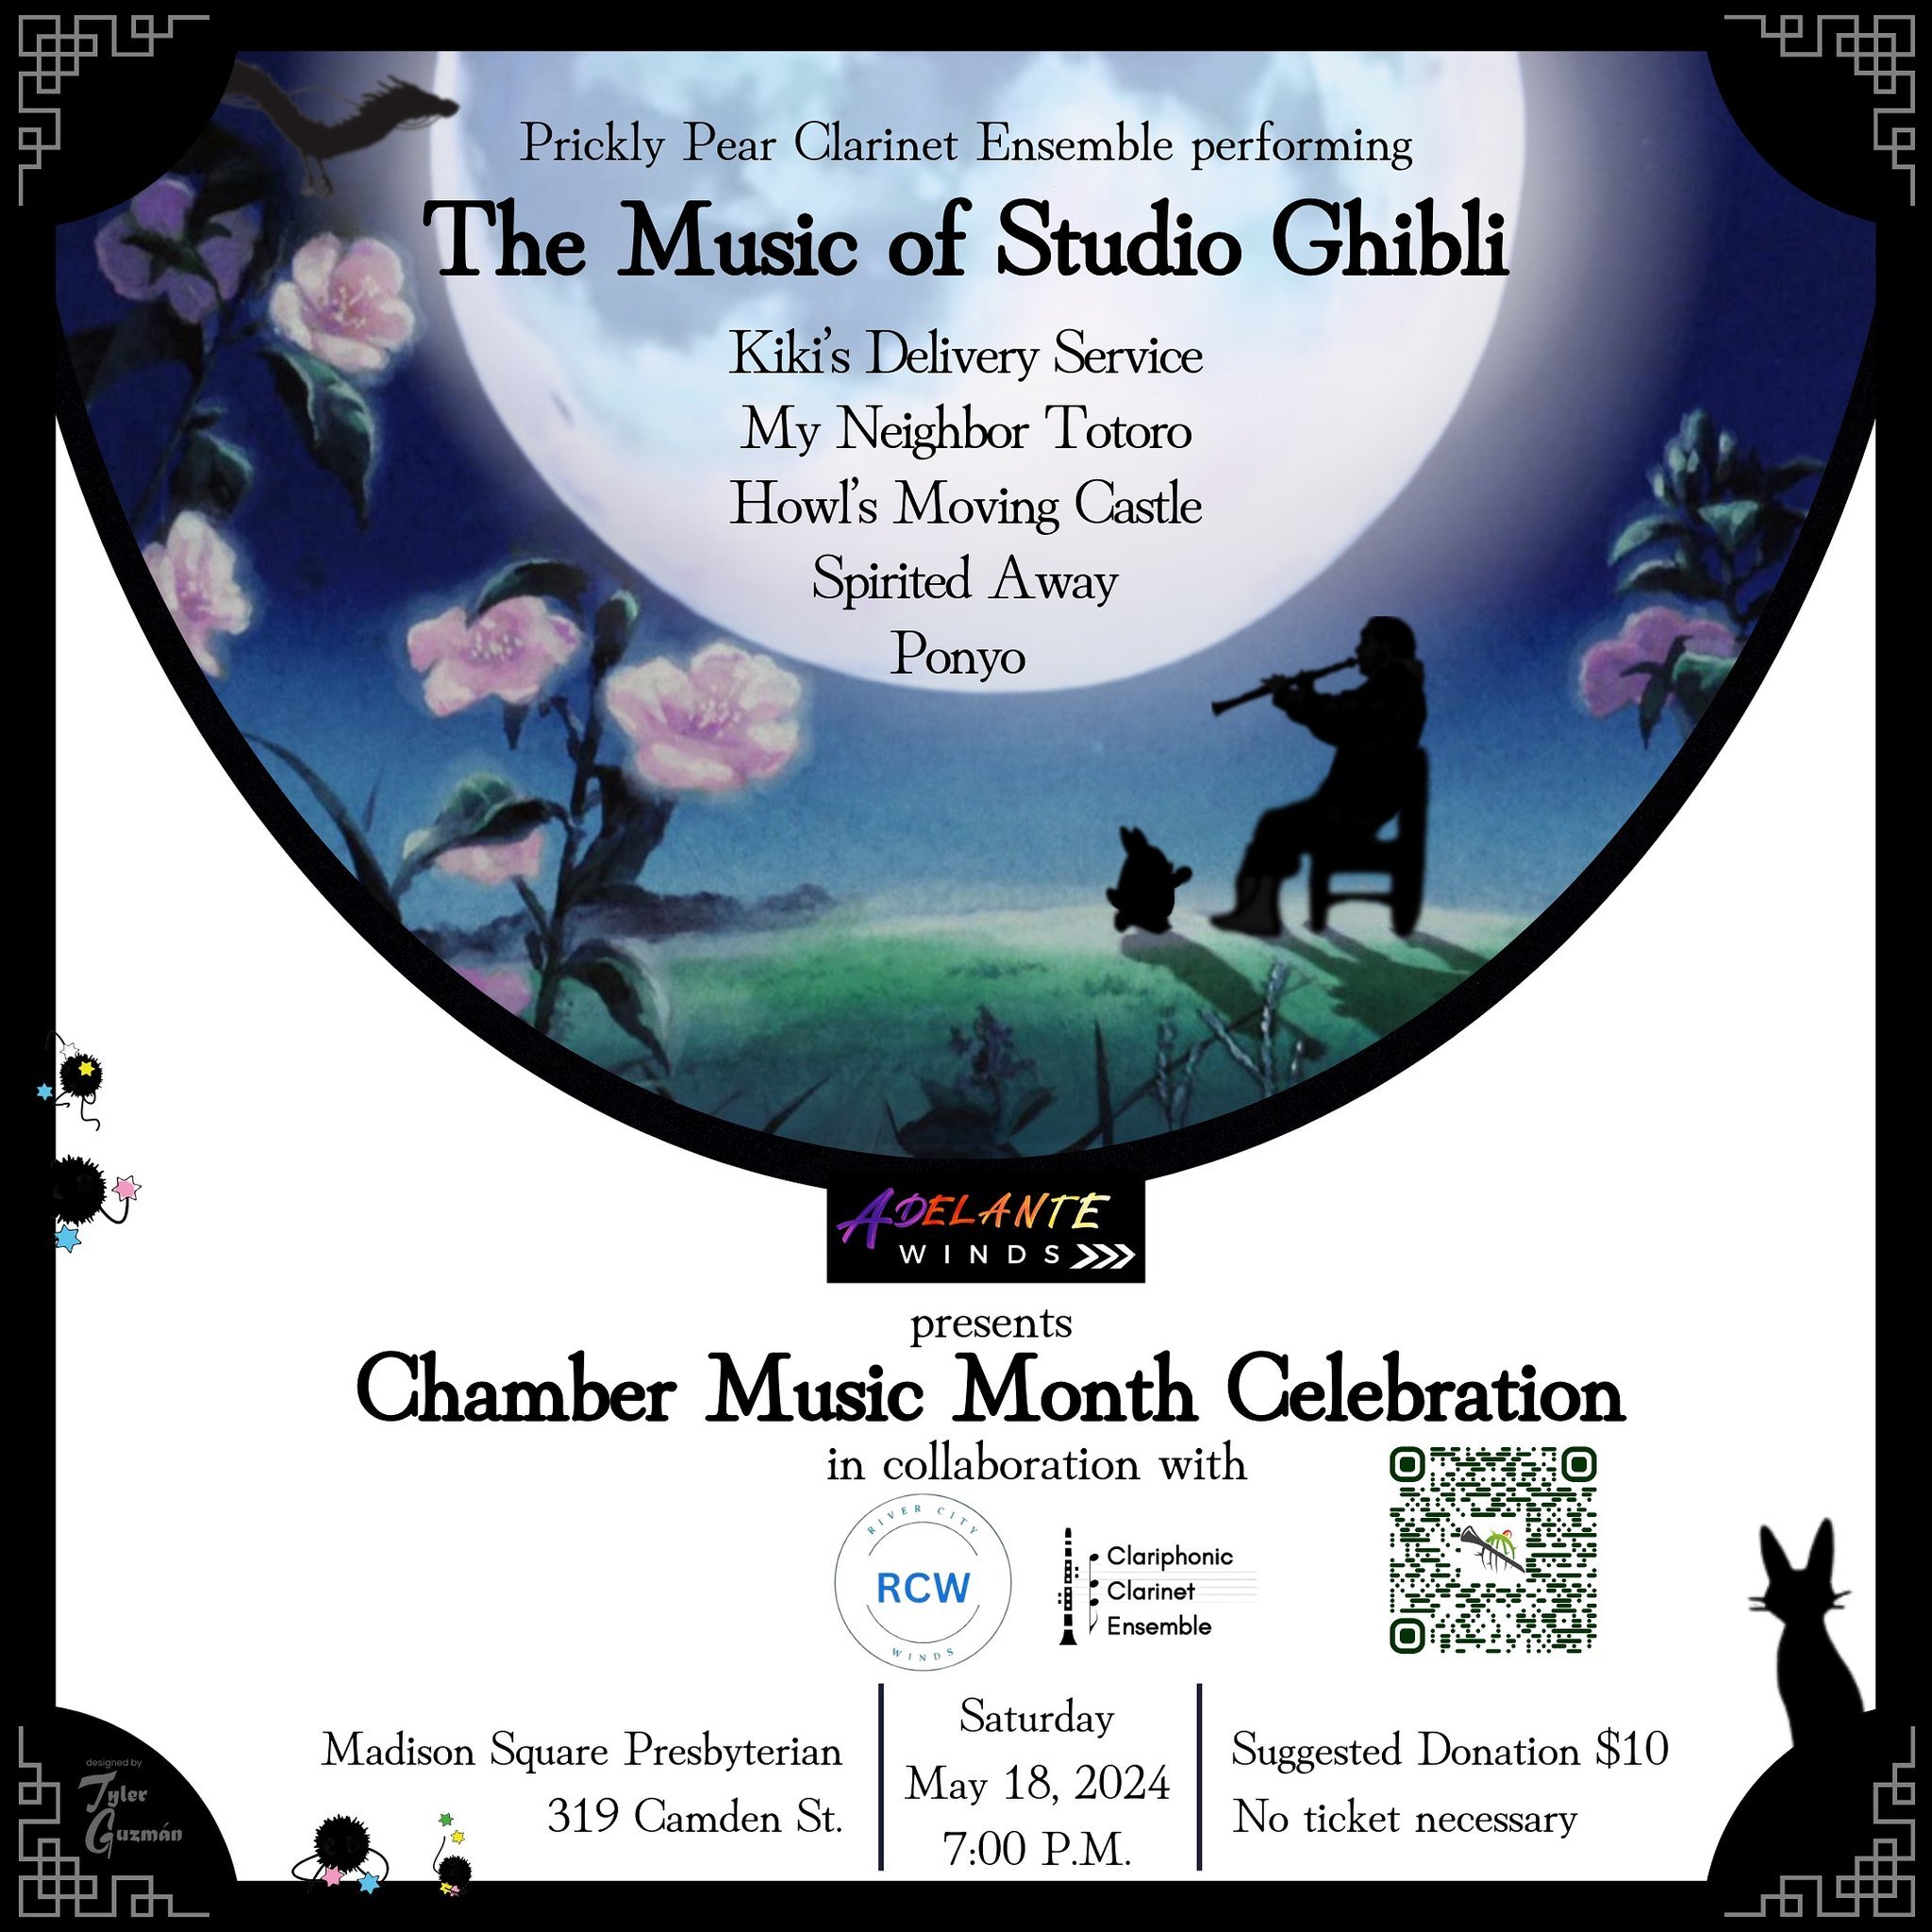 🤩This evening!🫰
Catch four San Antonio groups performing and celebrating National Chamber Music Month 🎶 
Enjoy so much music, including our set of Studio Ghibli music 💚
&mdash;&mdash;&mdash;
Celebrating National Chamber Music Month
by Adelante Wi